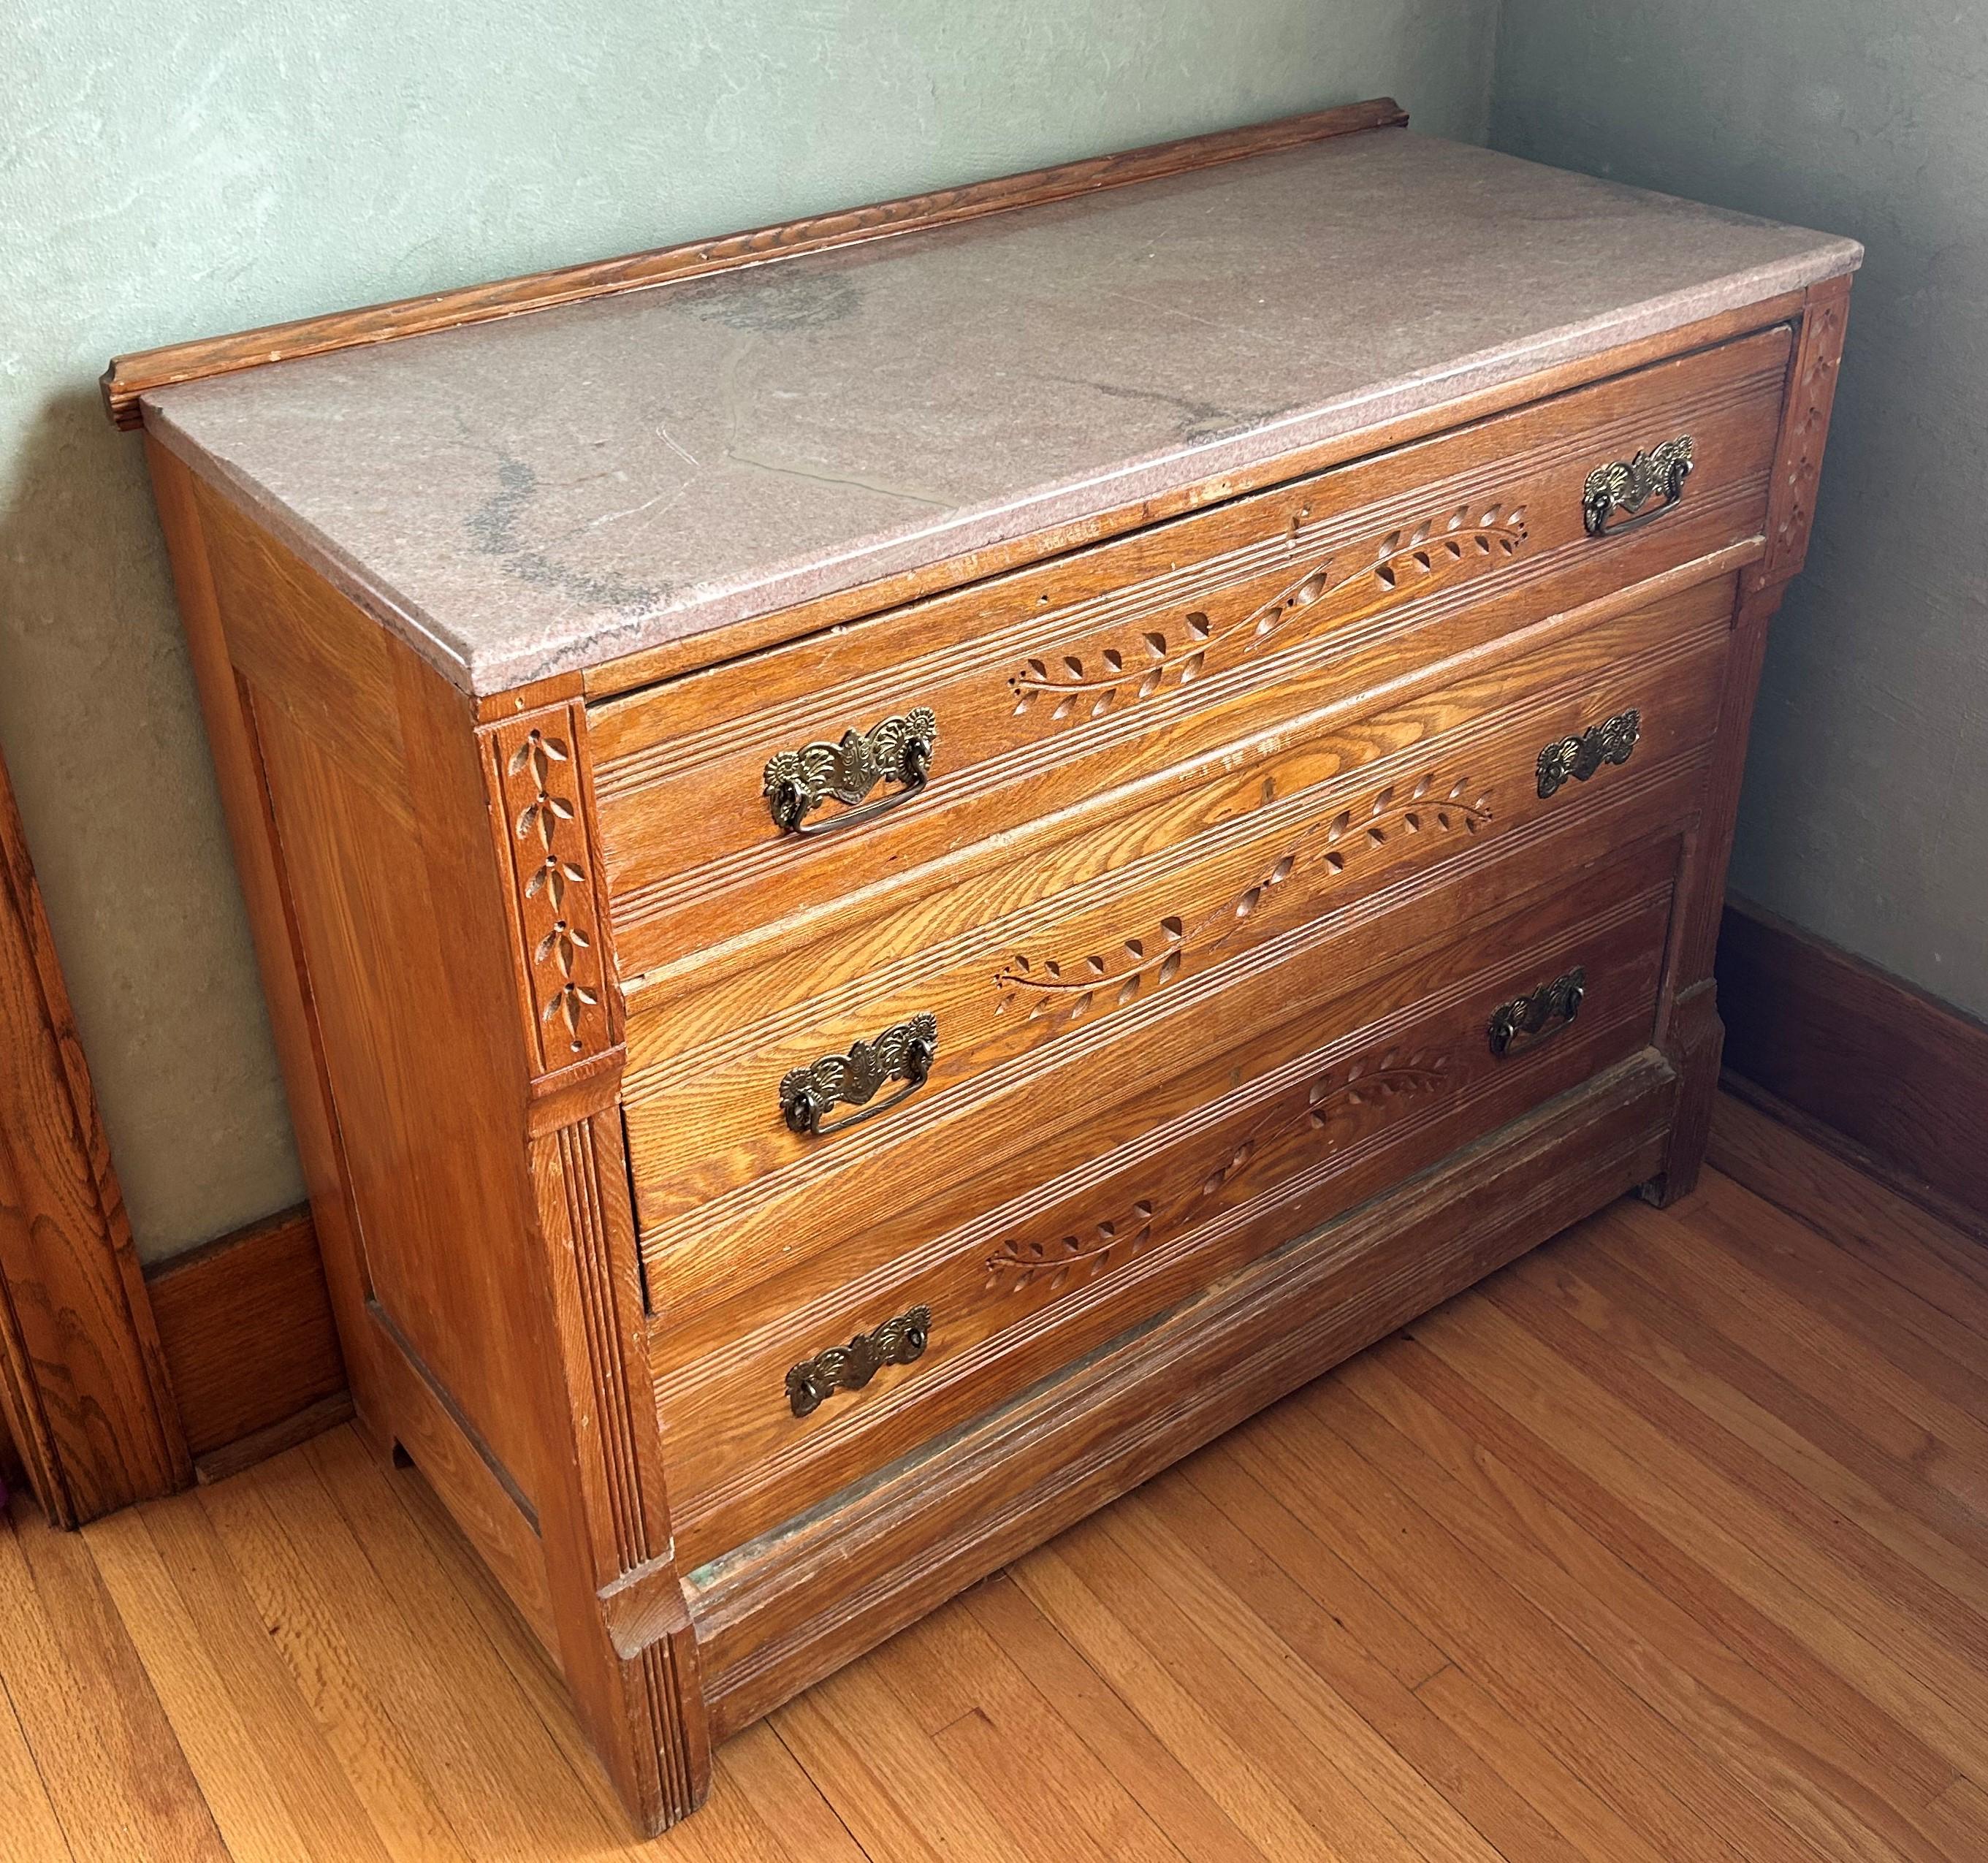 ANTIQUE THREE DRAWER CHEST OF DRAWERS - MARBLE TOP